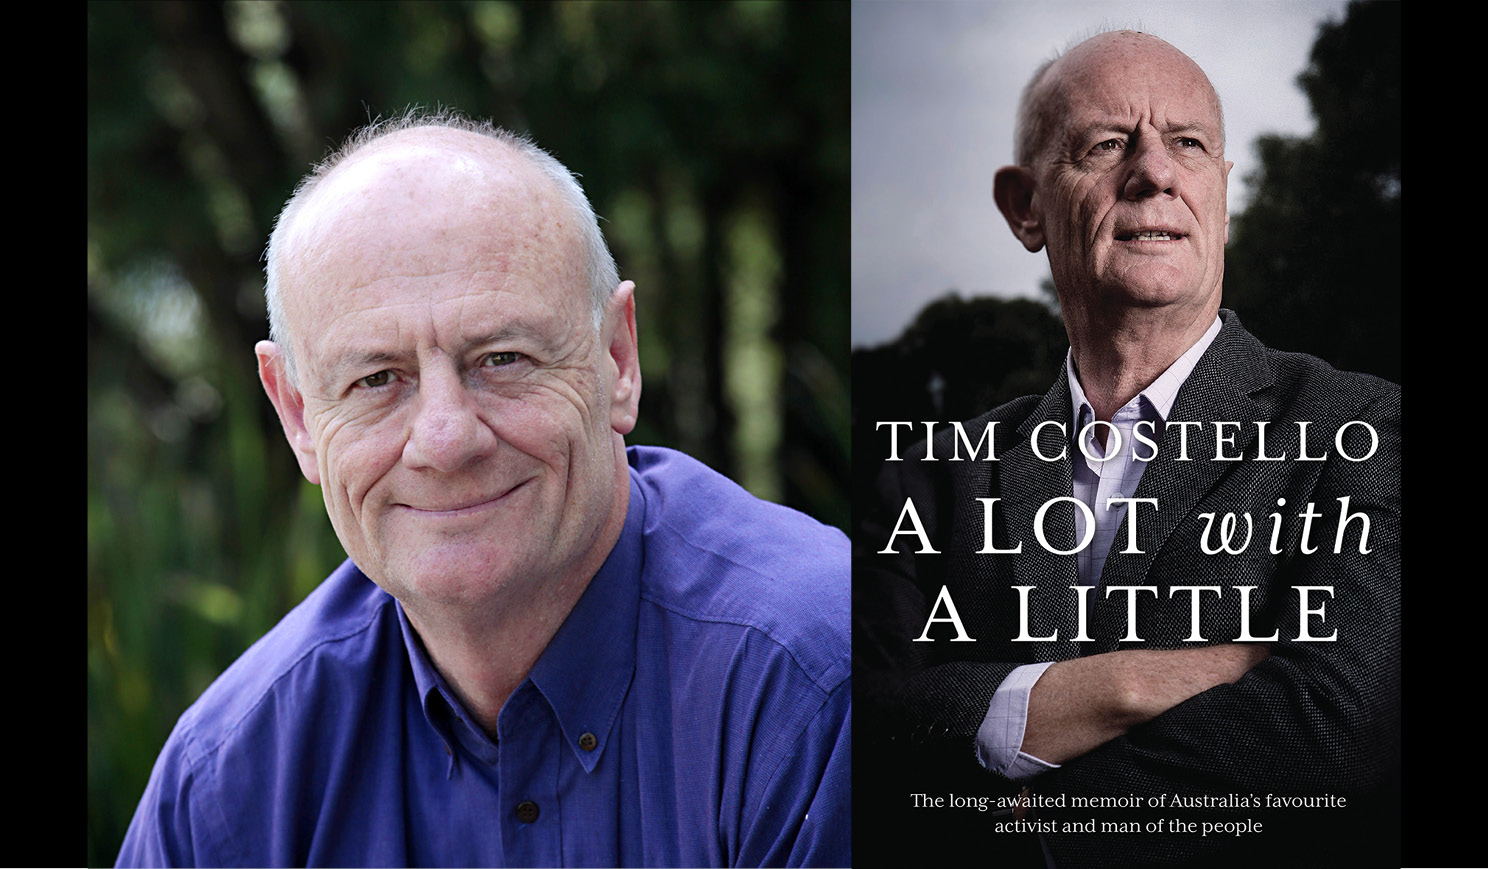 Tim Costello's headhsot alongside the cover of his book A lot with a little